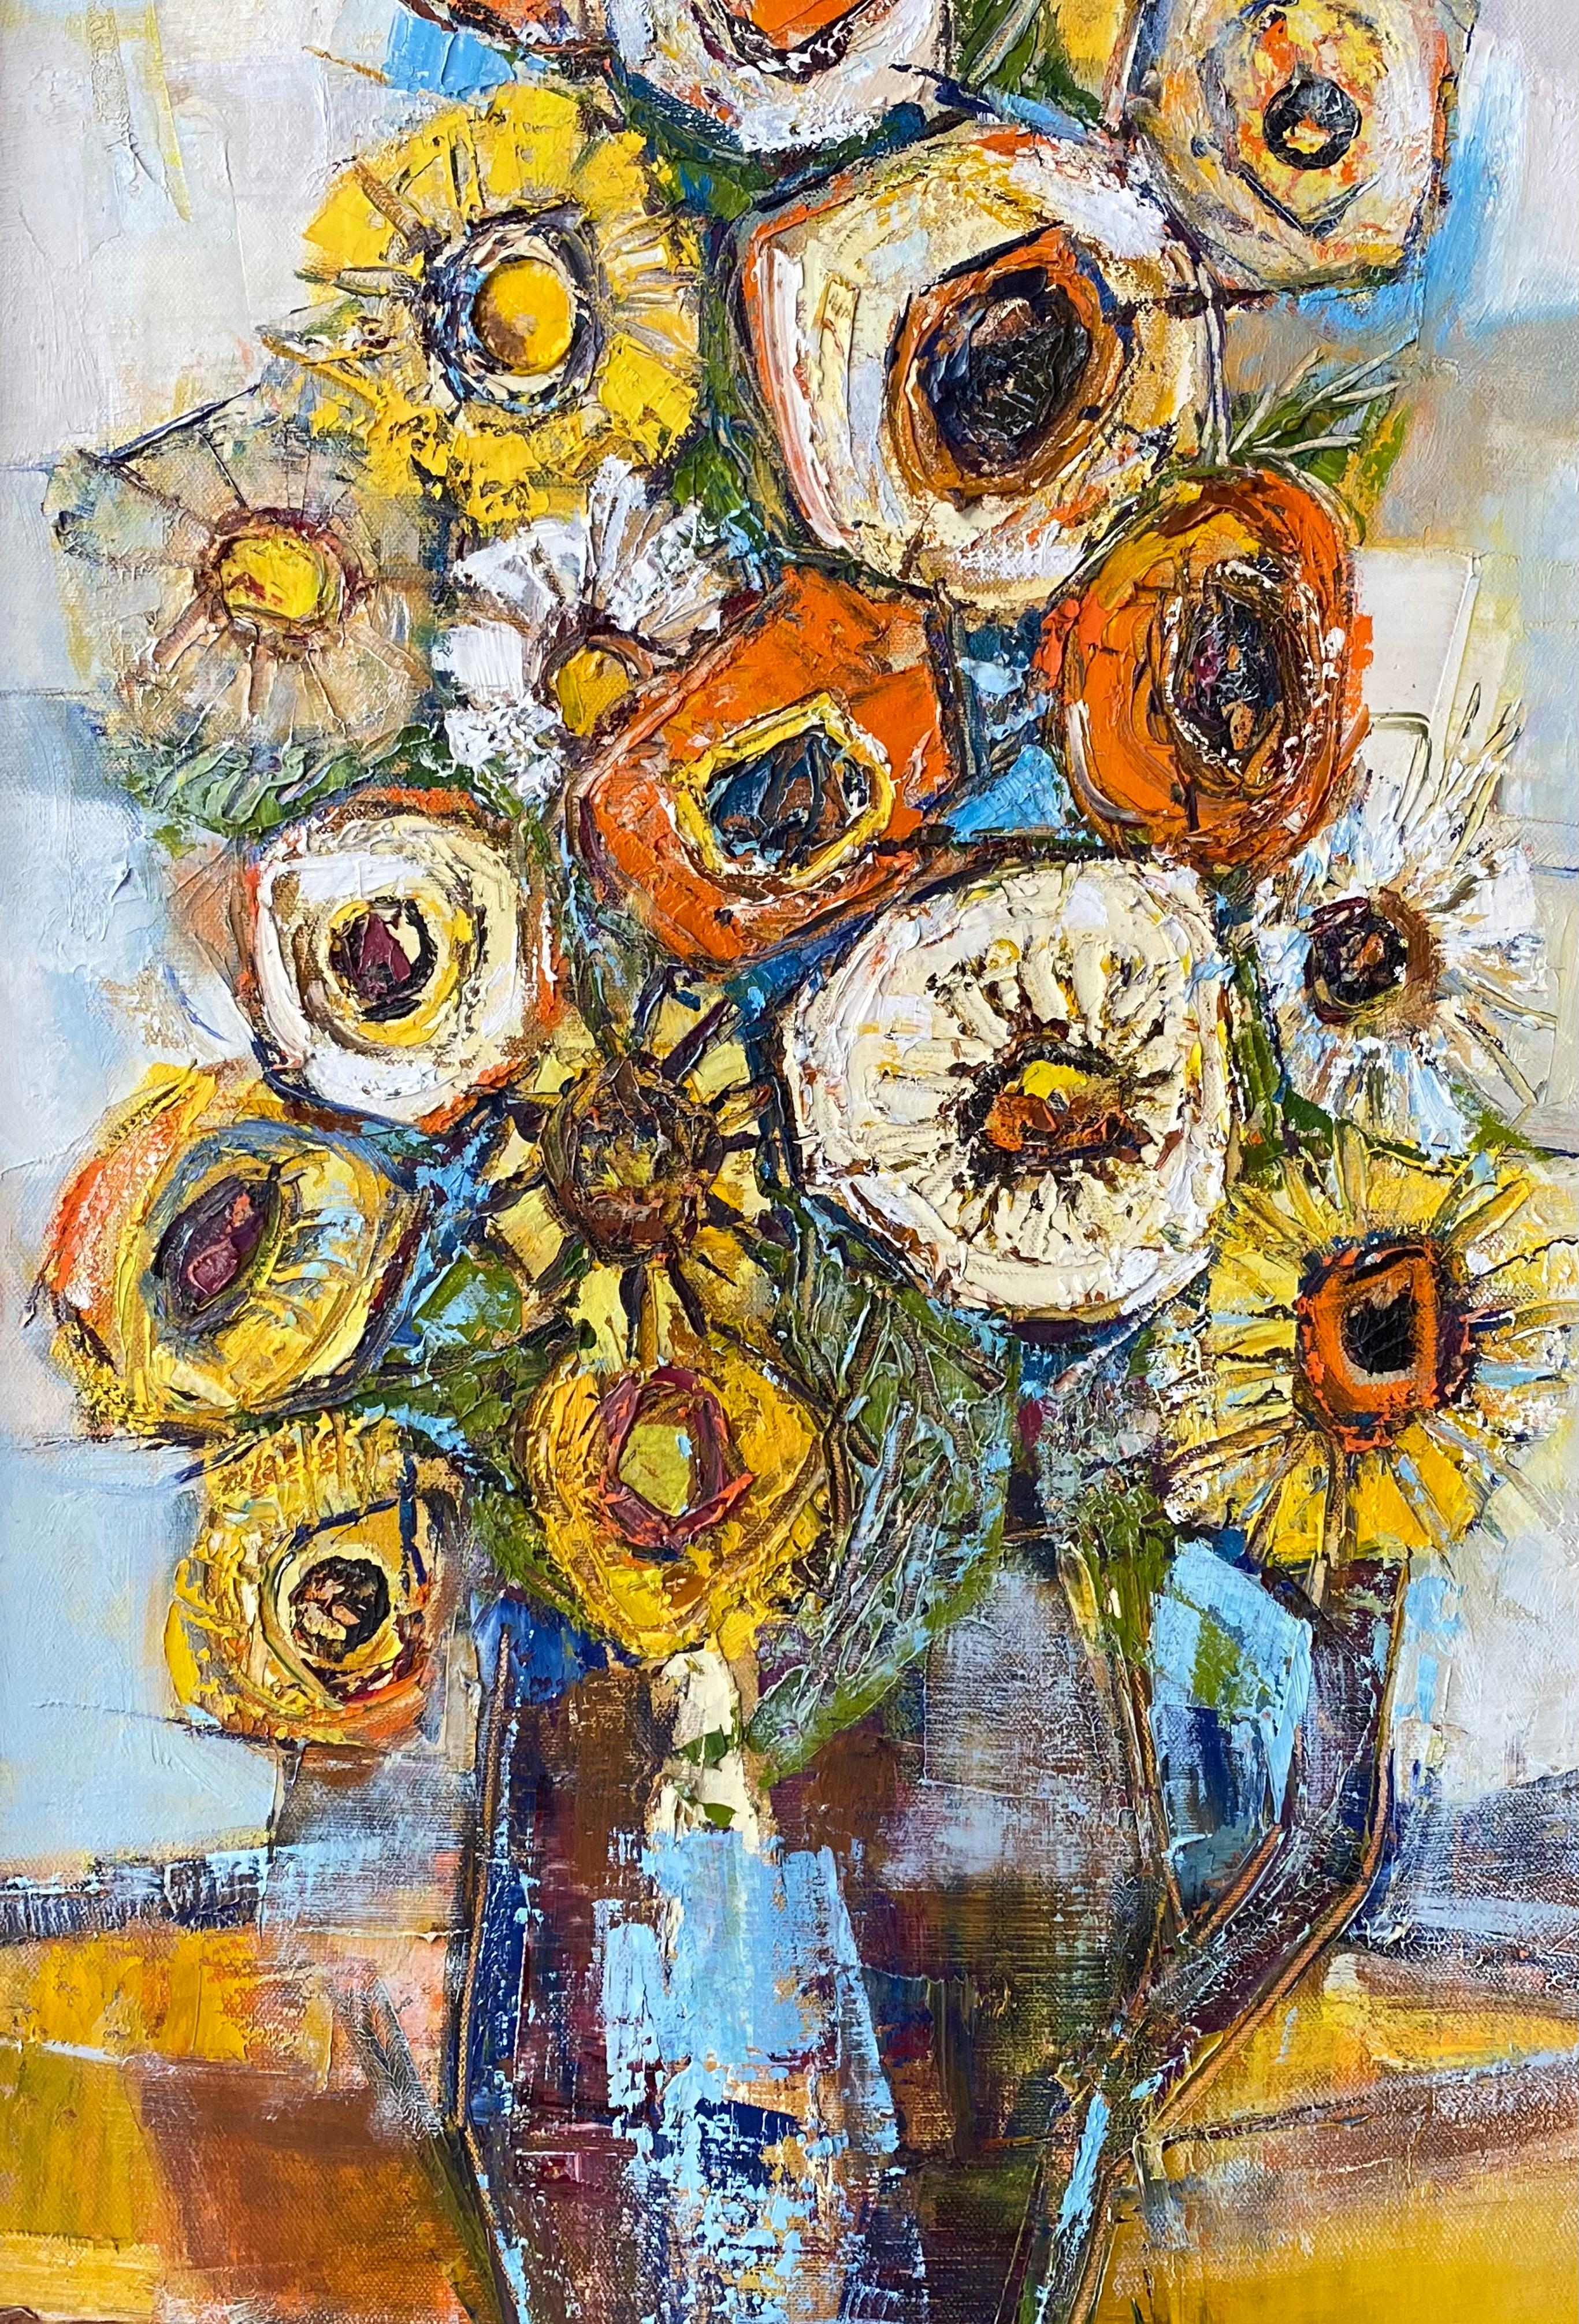 Here for consideration is a richly painted in a thick impasto technique; a vibrant and stylized vase overflowing with poppies and sunflowers.  Signed by the artist Edith E. Ferullo lower right “Ferullo” and dated 1974.  Condition of the painting is